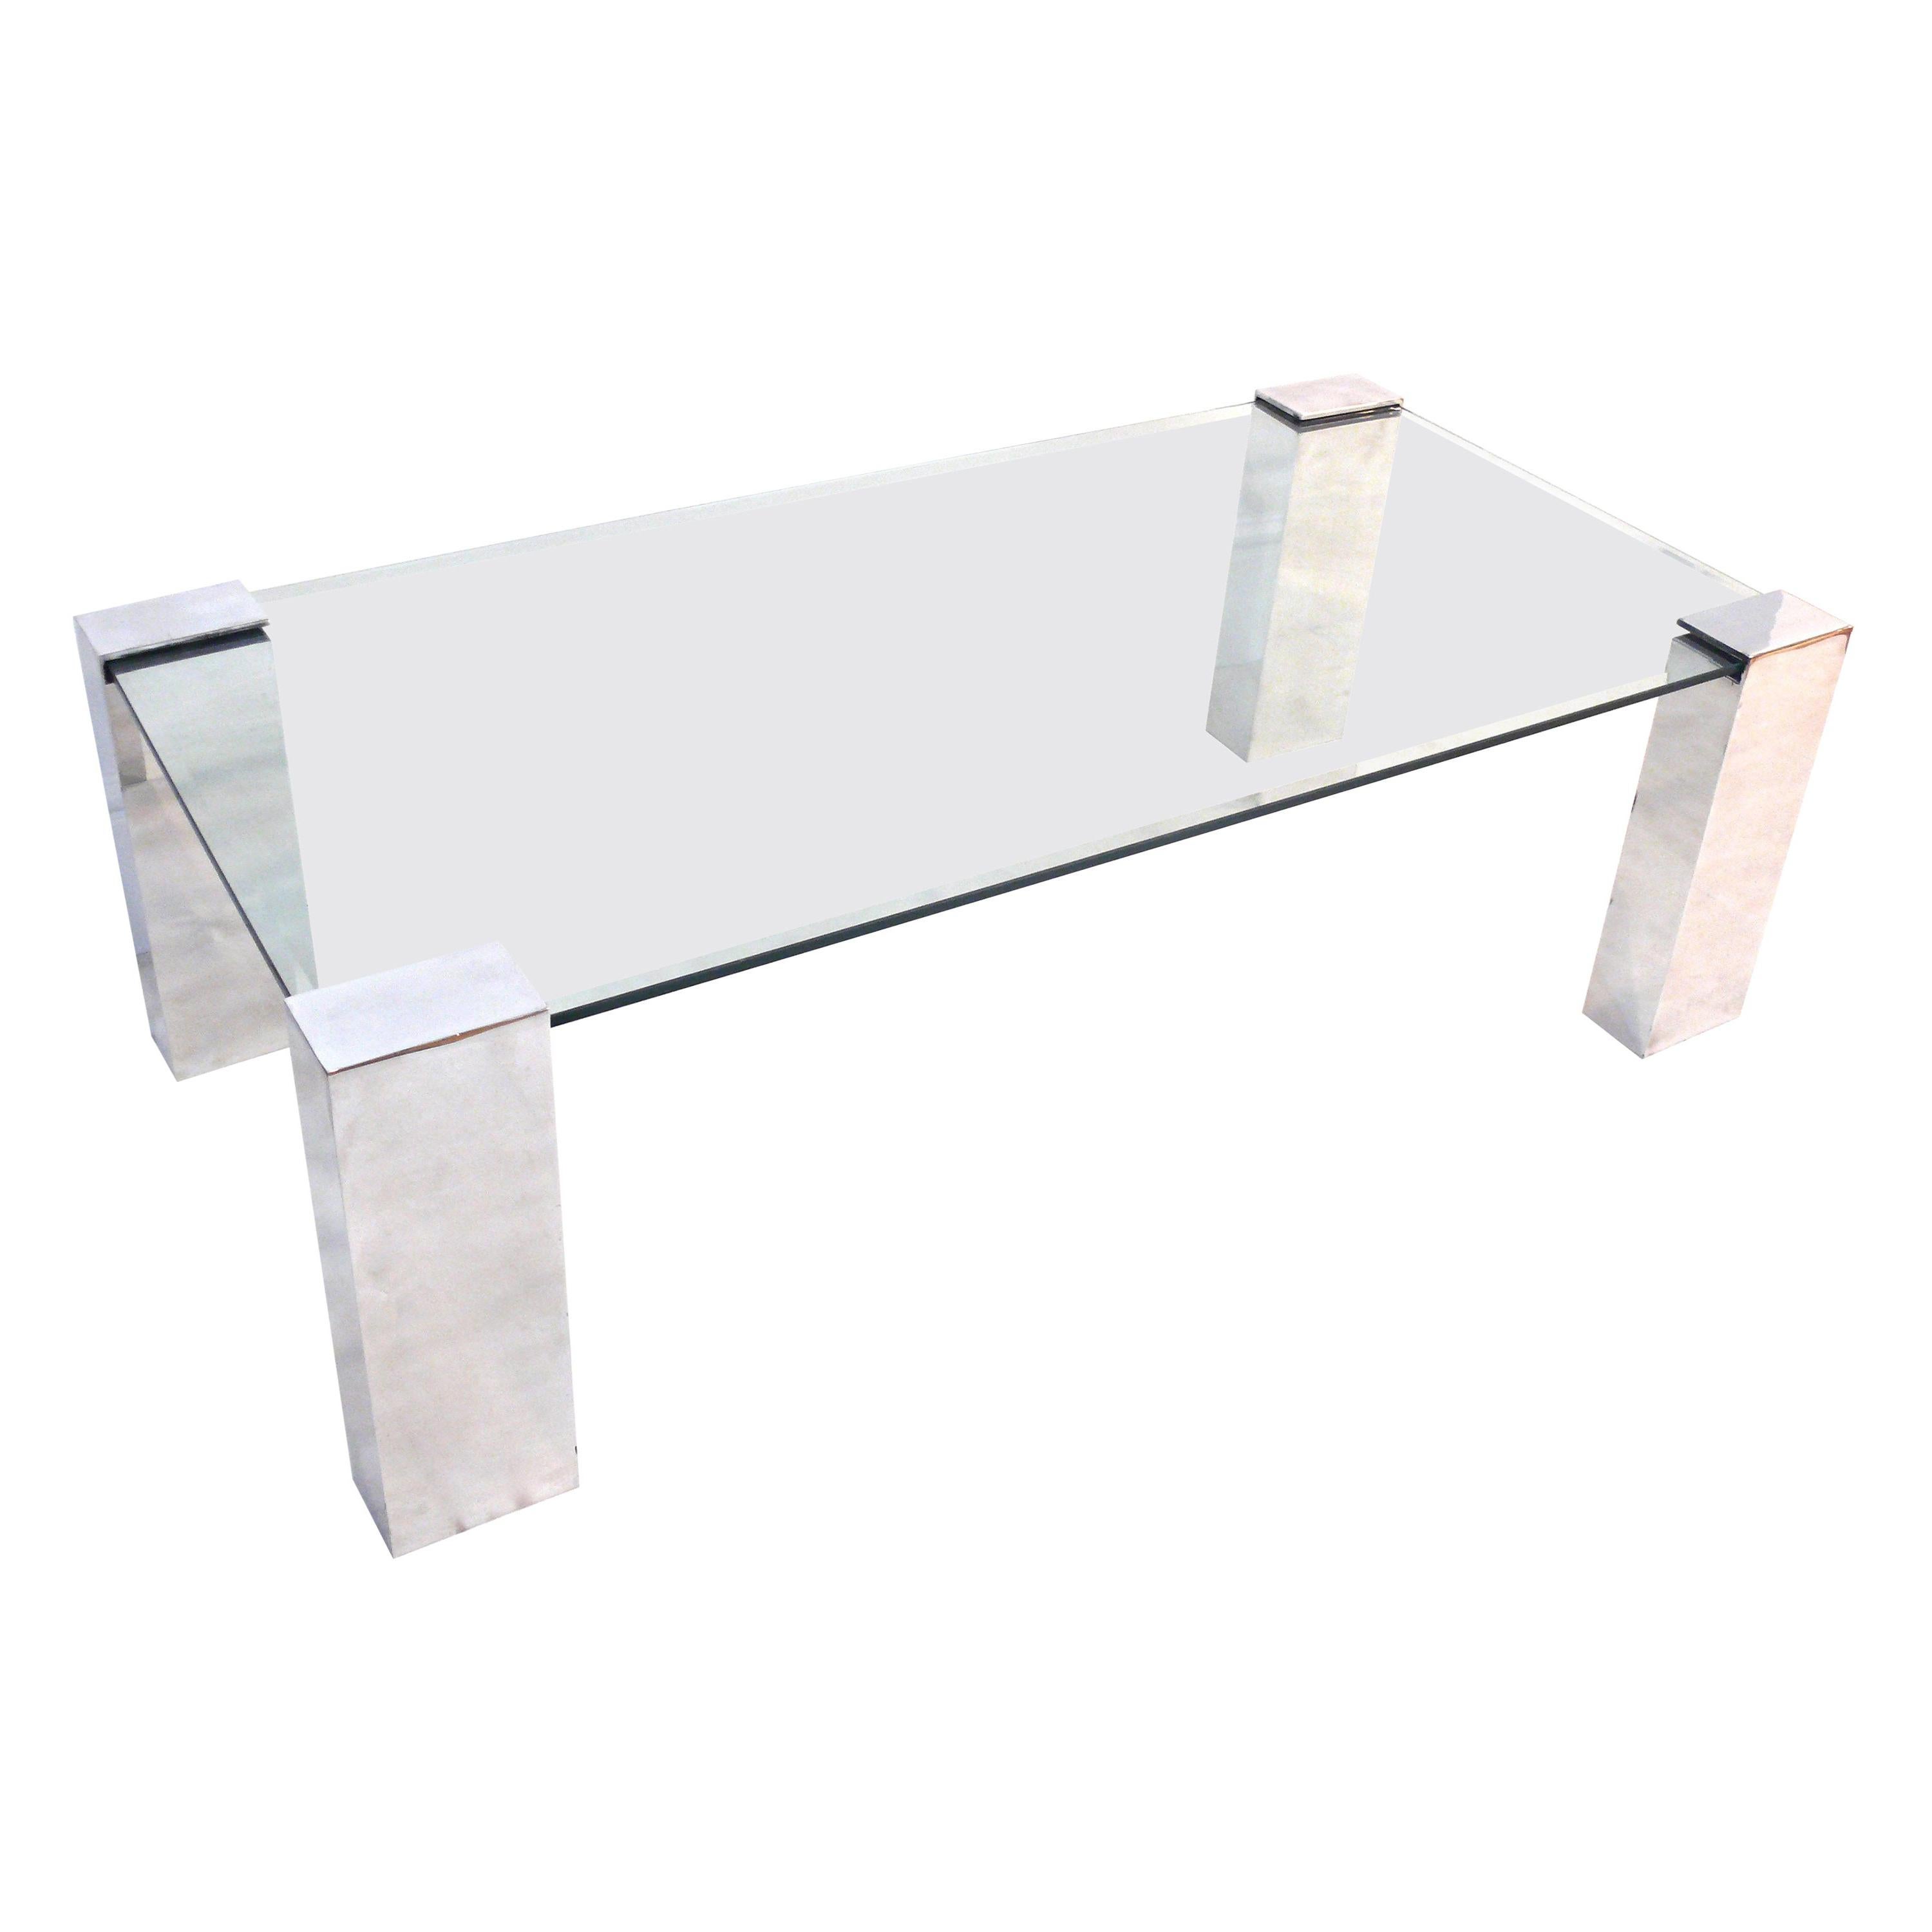 Pace Style Polished Aluminum Coffee Table